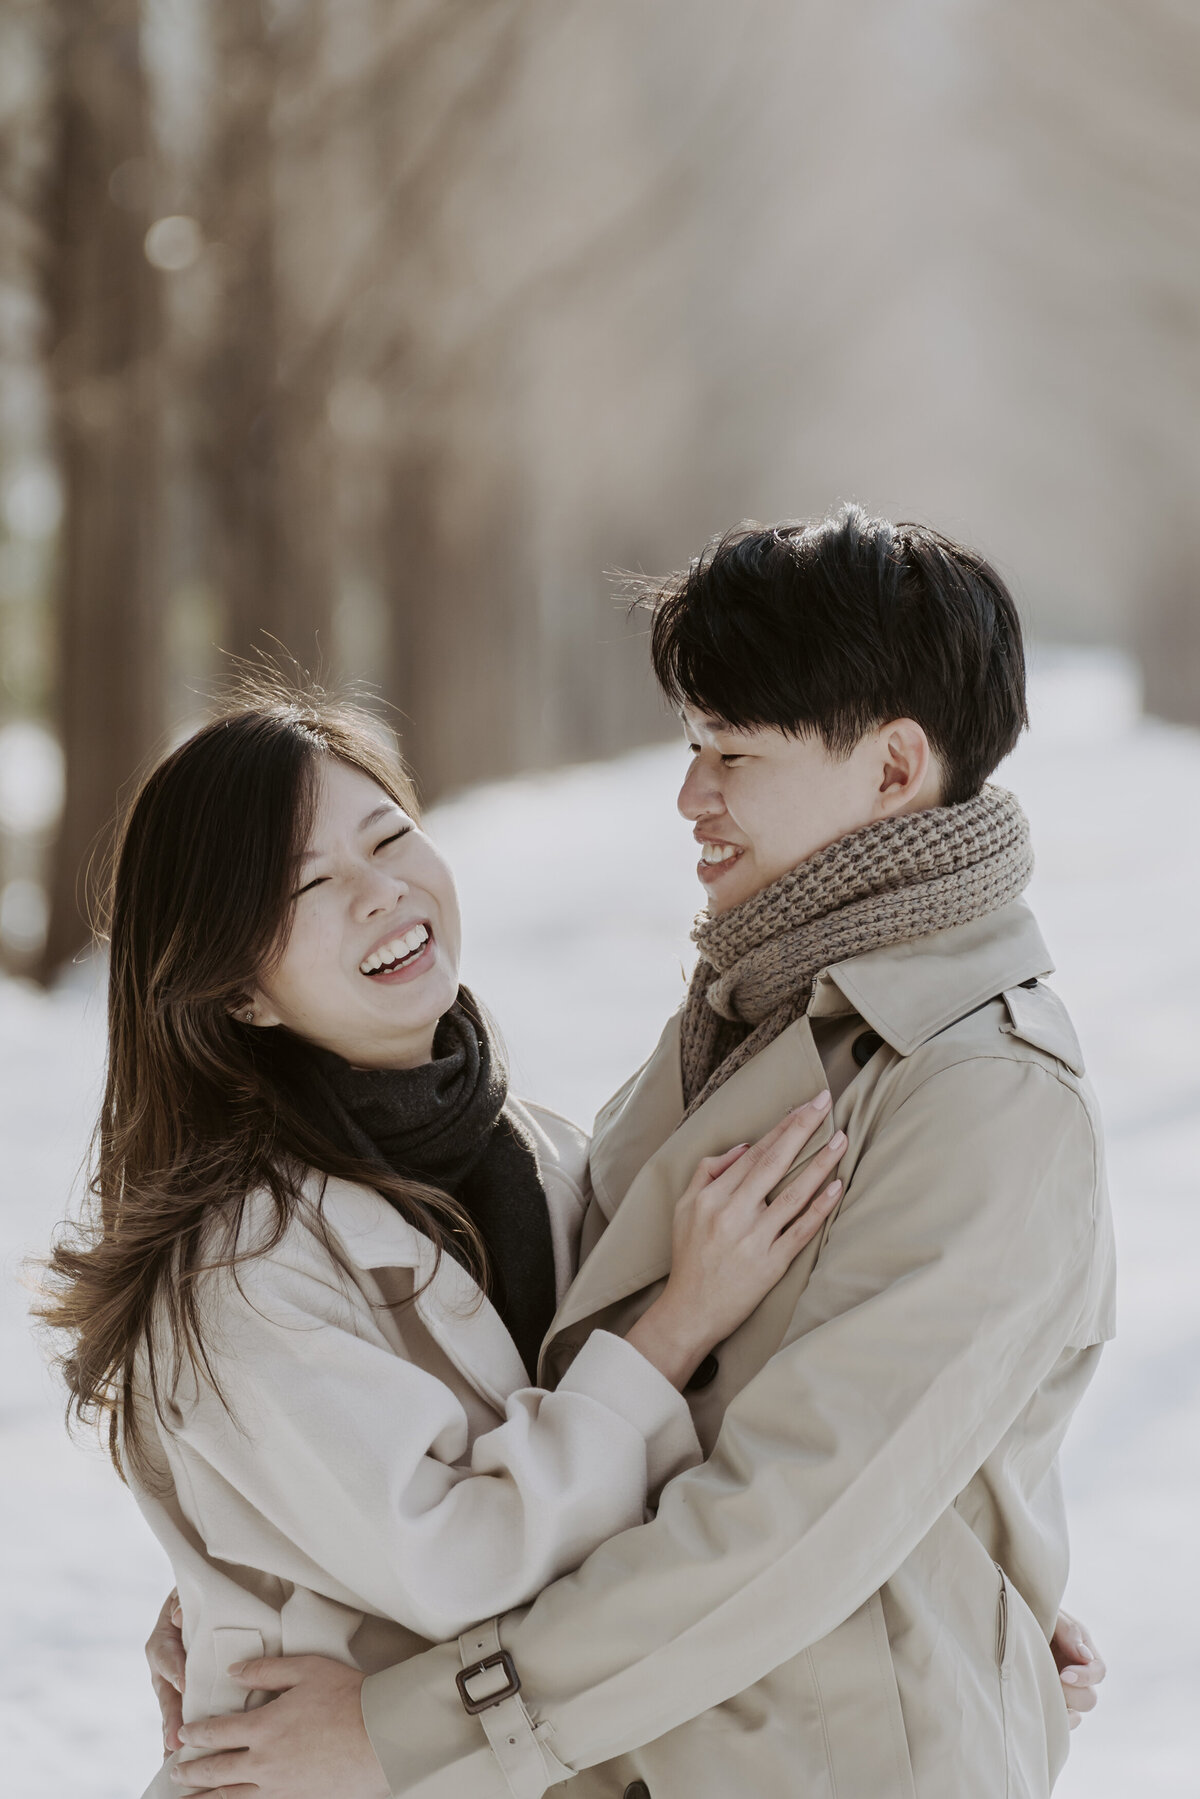 the couple laughing while hugging in metasequoia road full of snow during winter